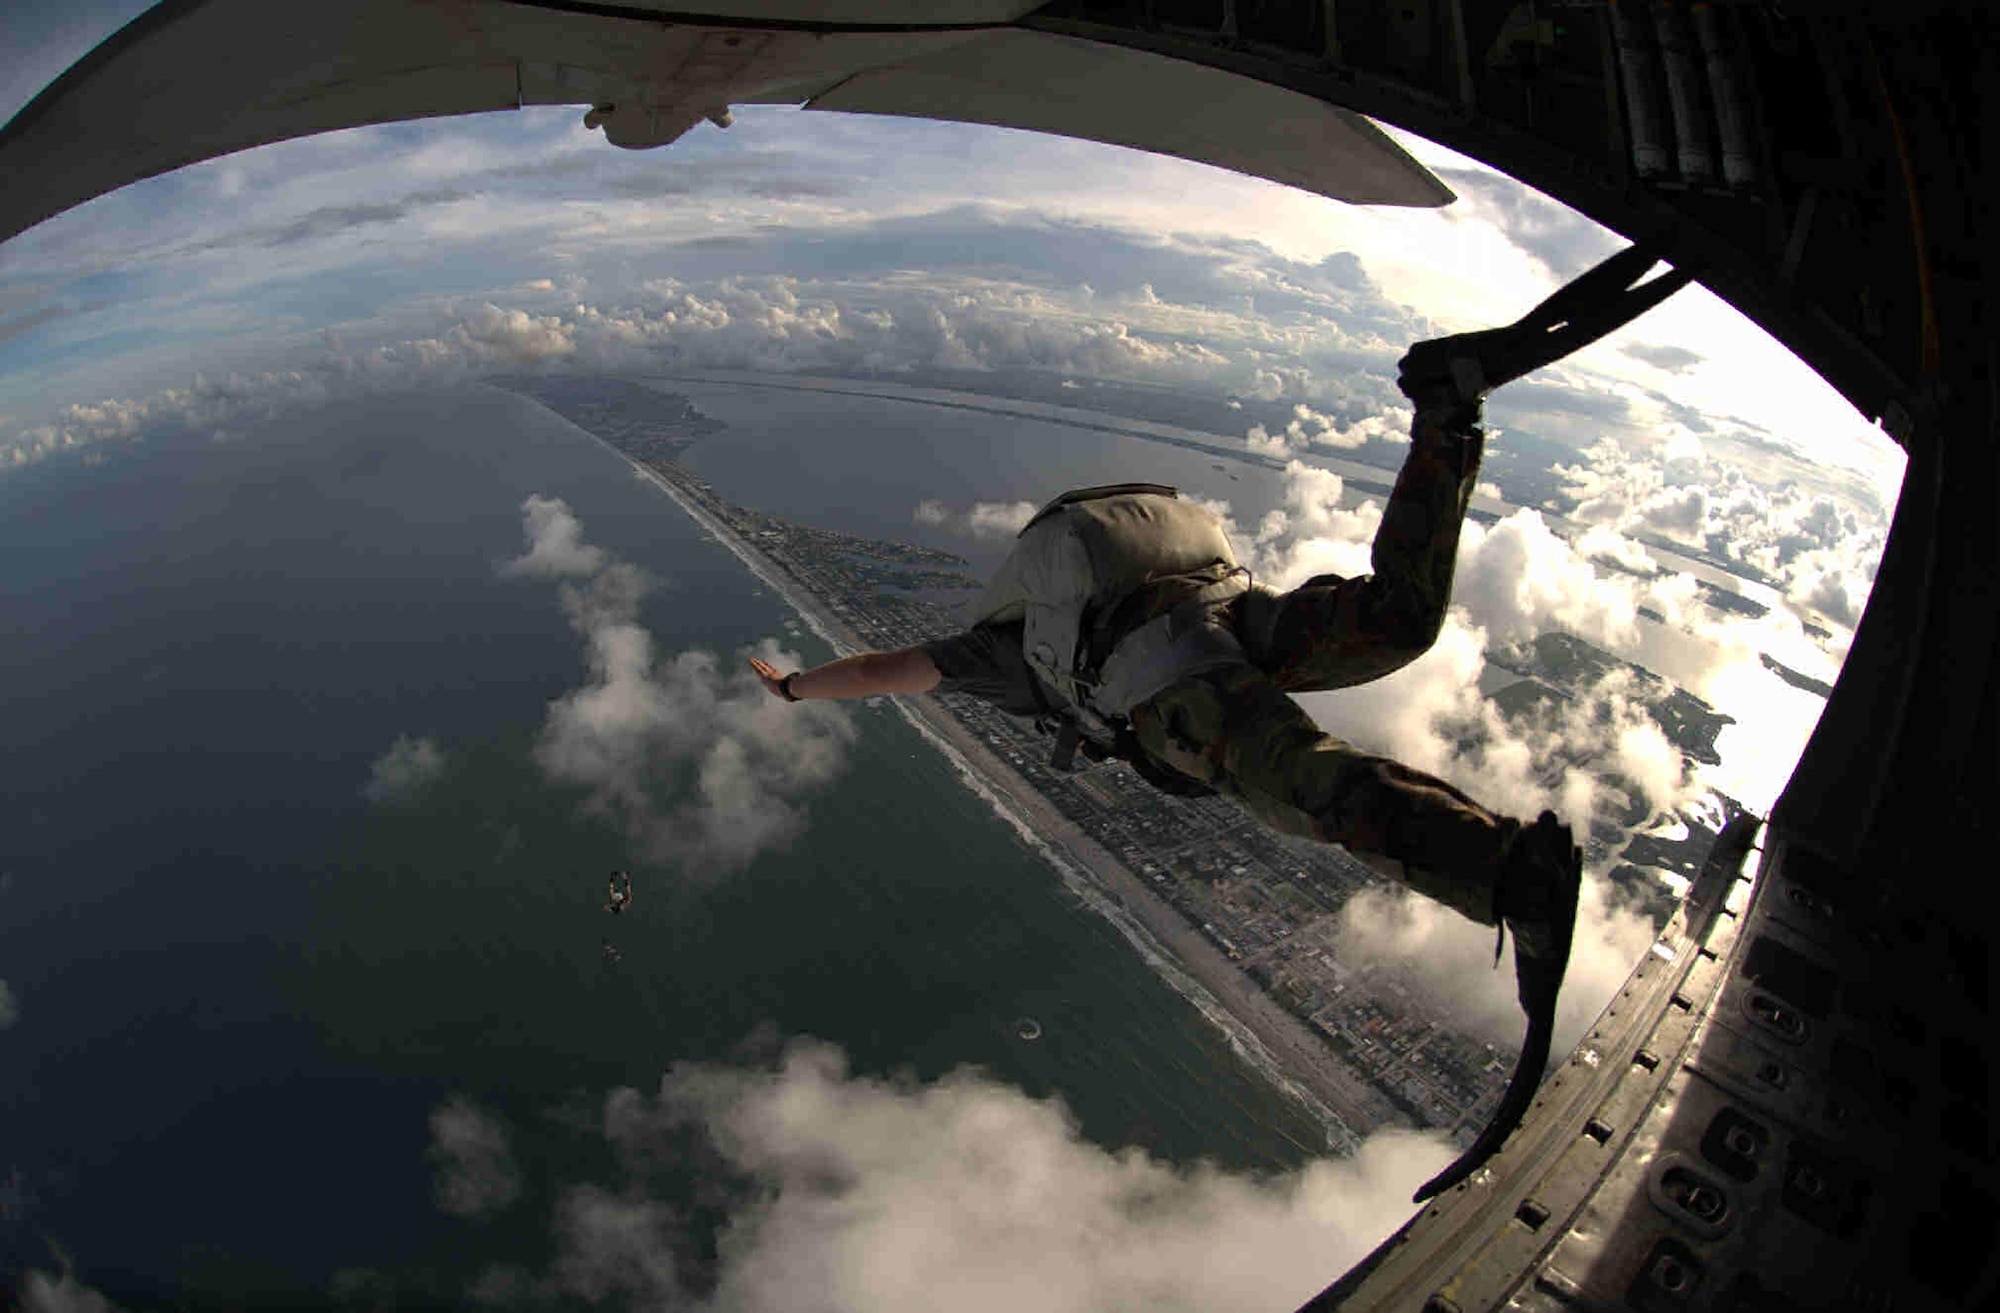 An Air Force Reserve Pararescueman from the 920th Rescue Wing parachutes out of a HC-130P/N to a landing zone established in the Atlantic Ocean off Cocoa Beach, Florida.